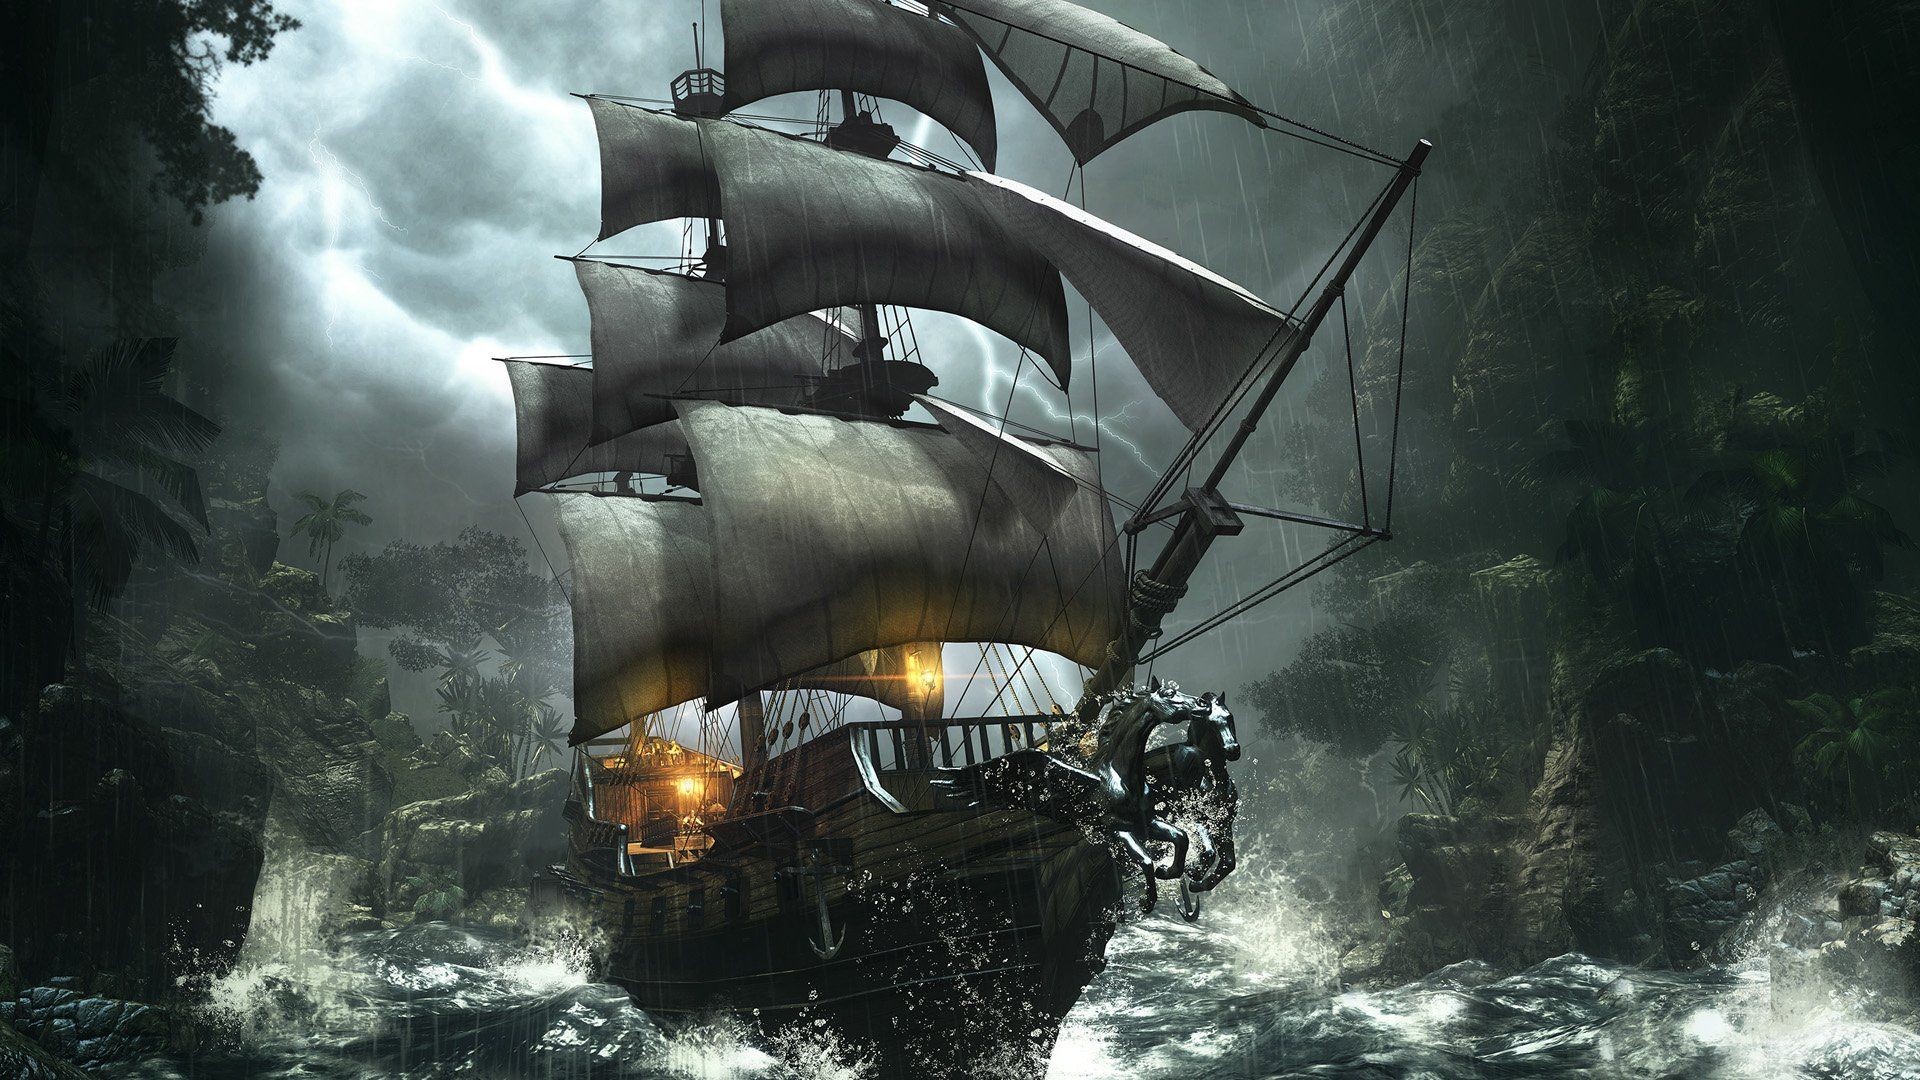 1920x1080 Pirate Ship Wallpaper High Definition #02c20  px 420.15 KB Other  Map. 1280x1024. Battle.